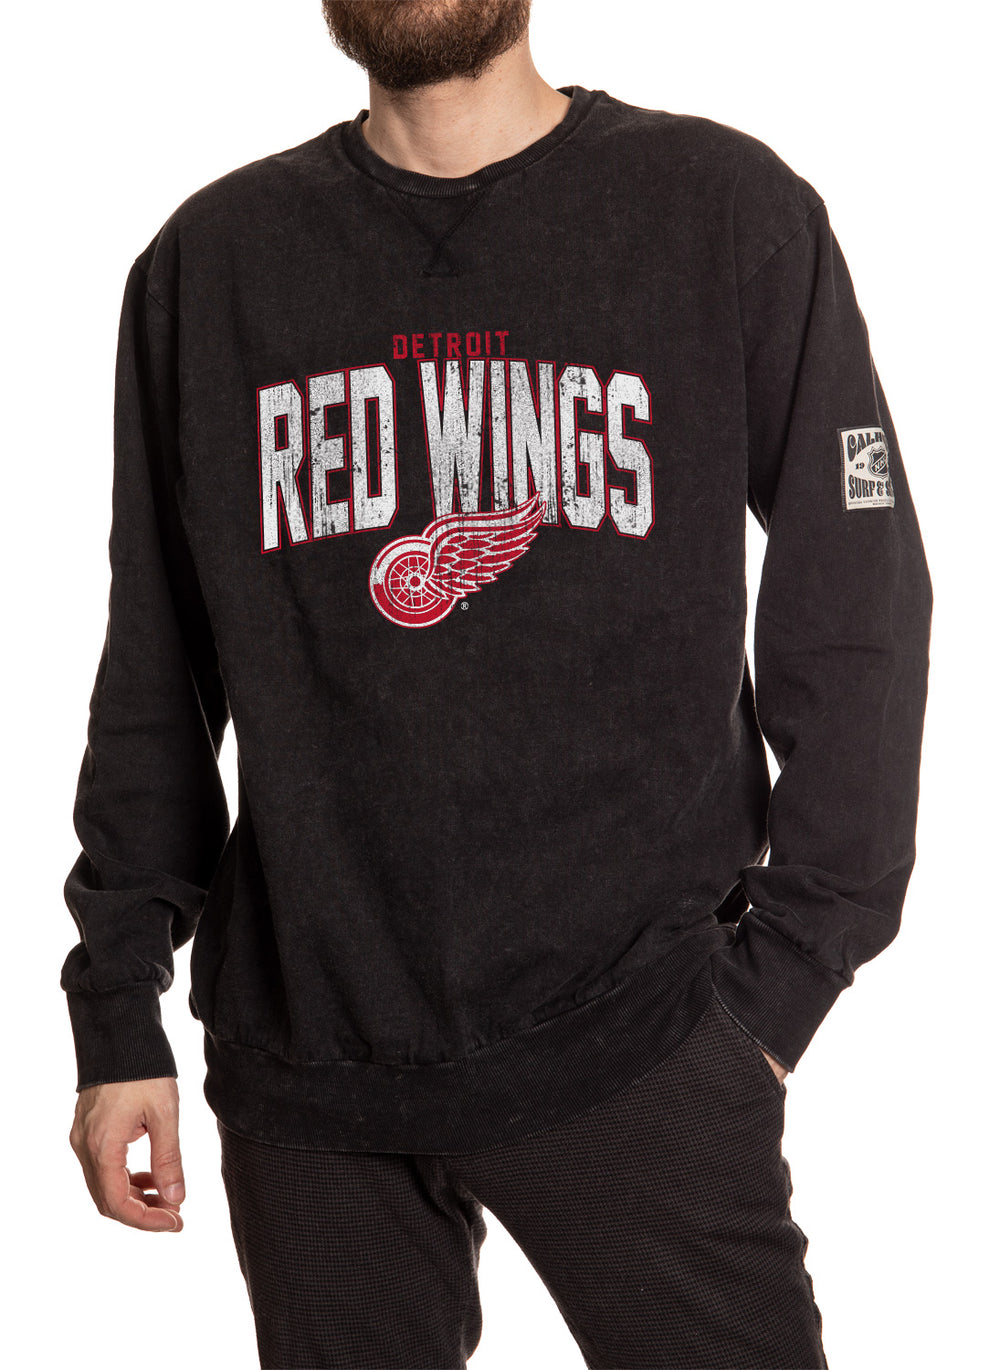 Detroit Red Wings Acid Wash Crewneck in Black Front View